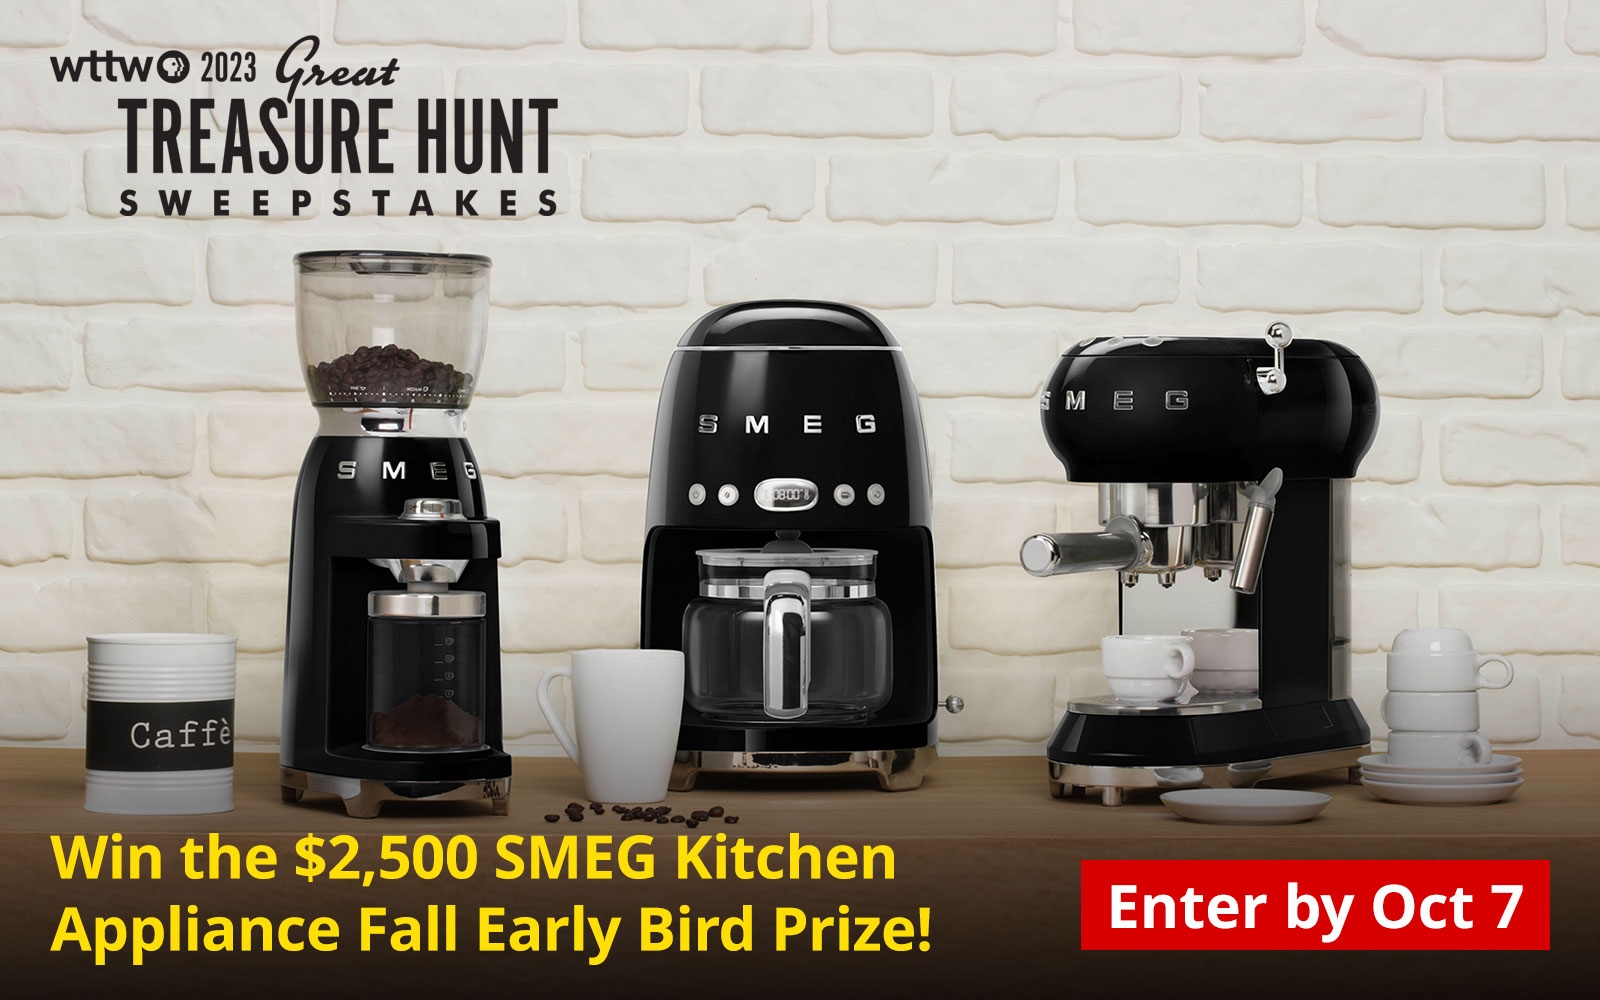 Enter now for the Fall Early Bird Prize!